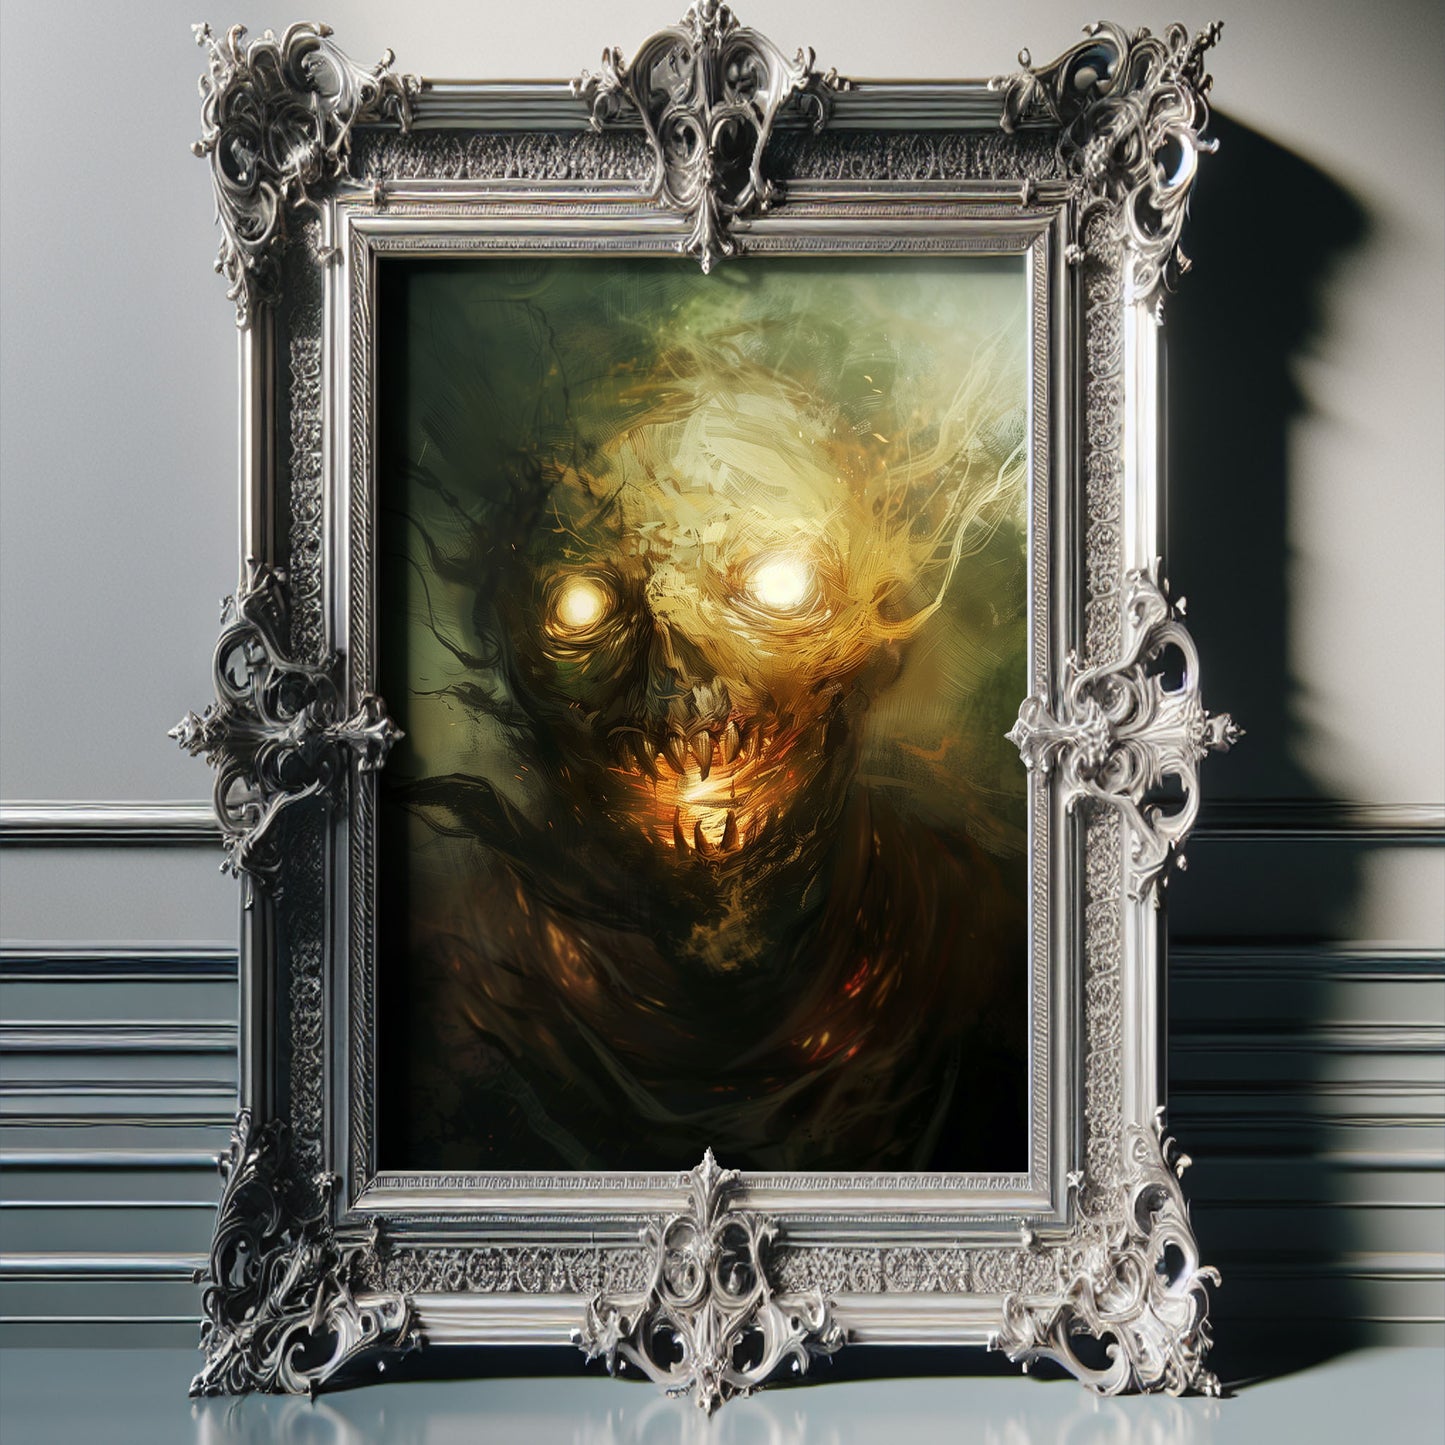 Gothic Fire Head Painting - Creepy Wall Art for a Haunting Home Decor